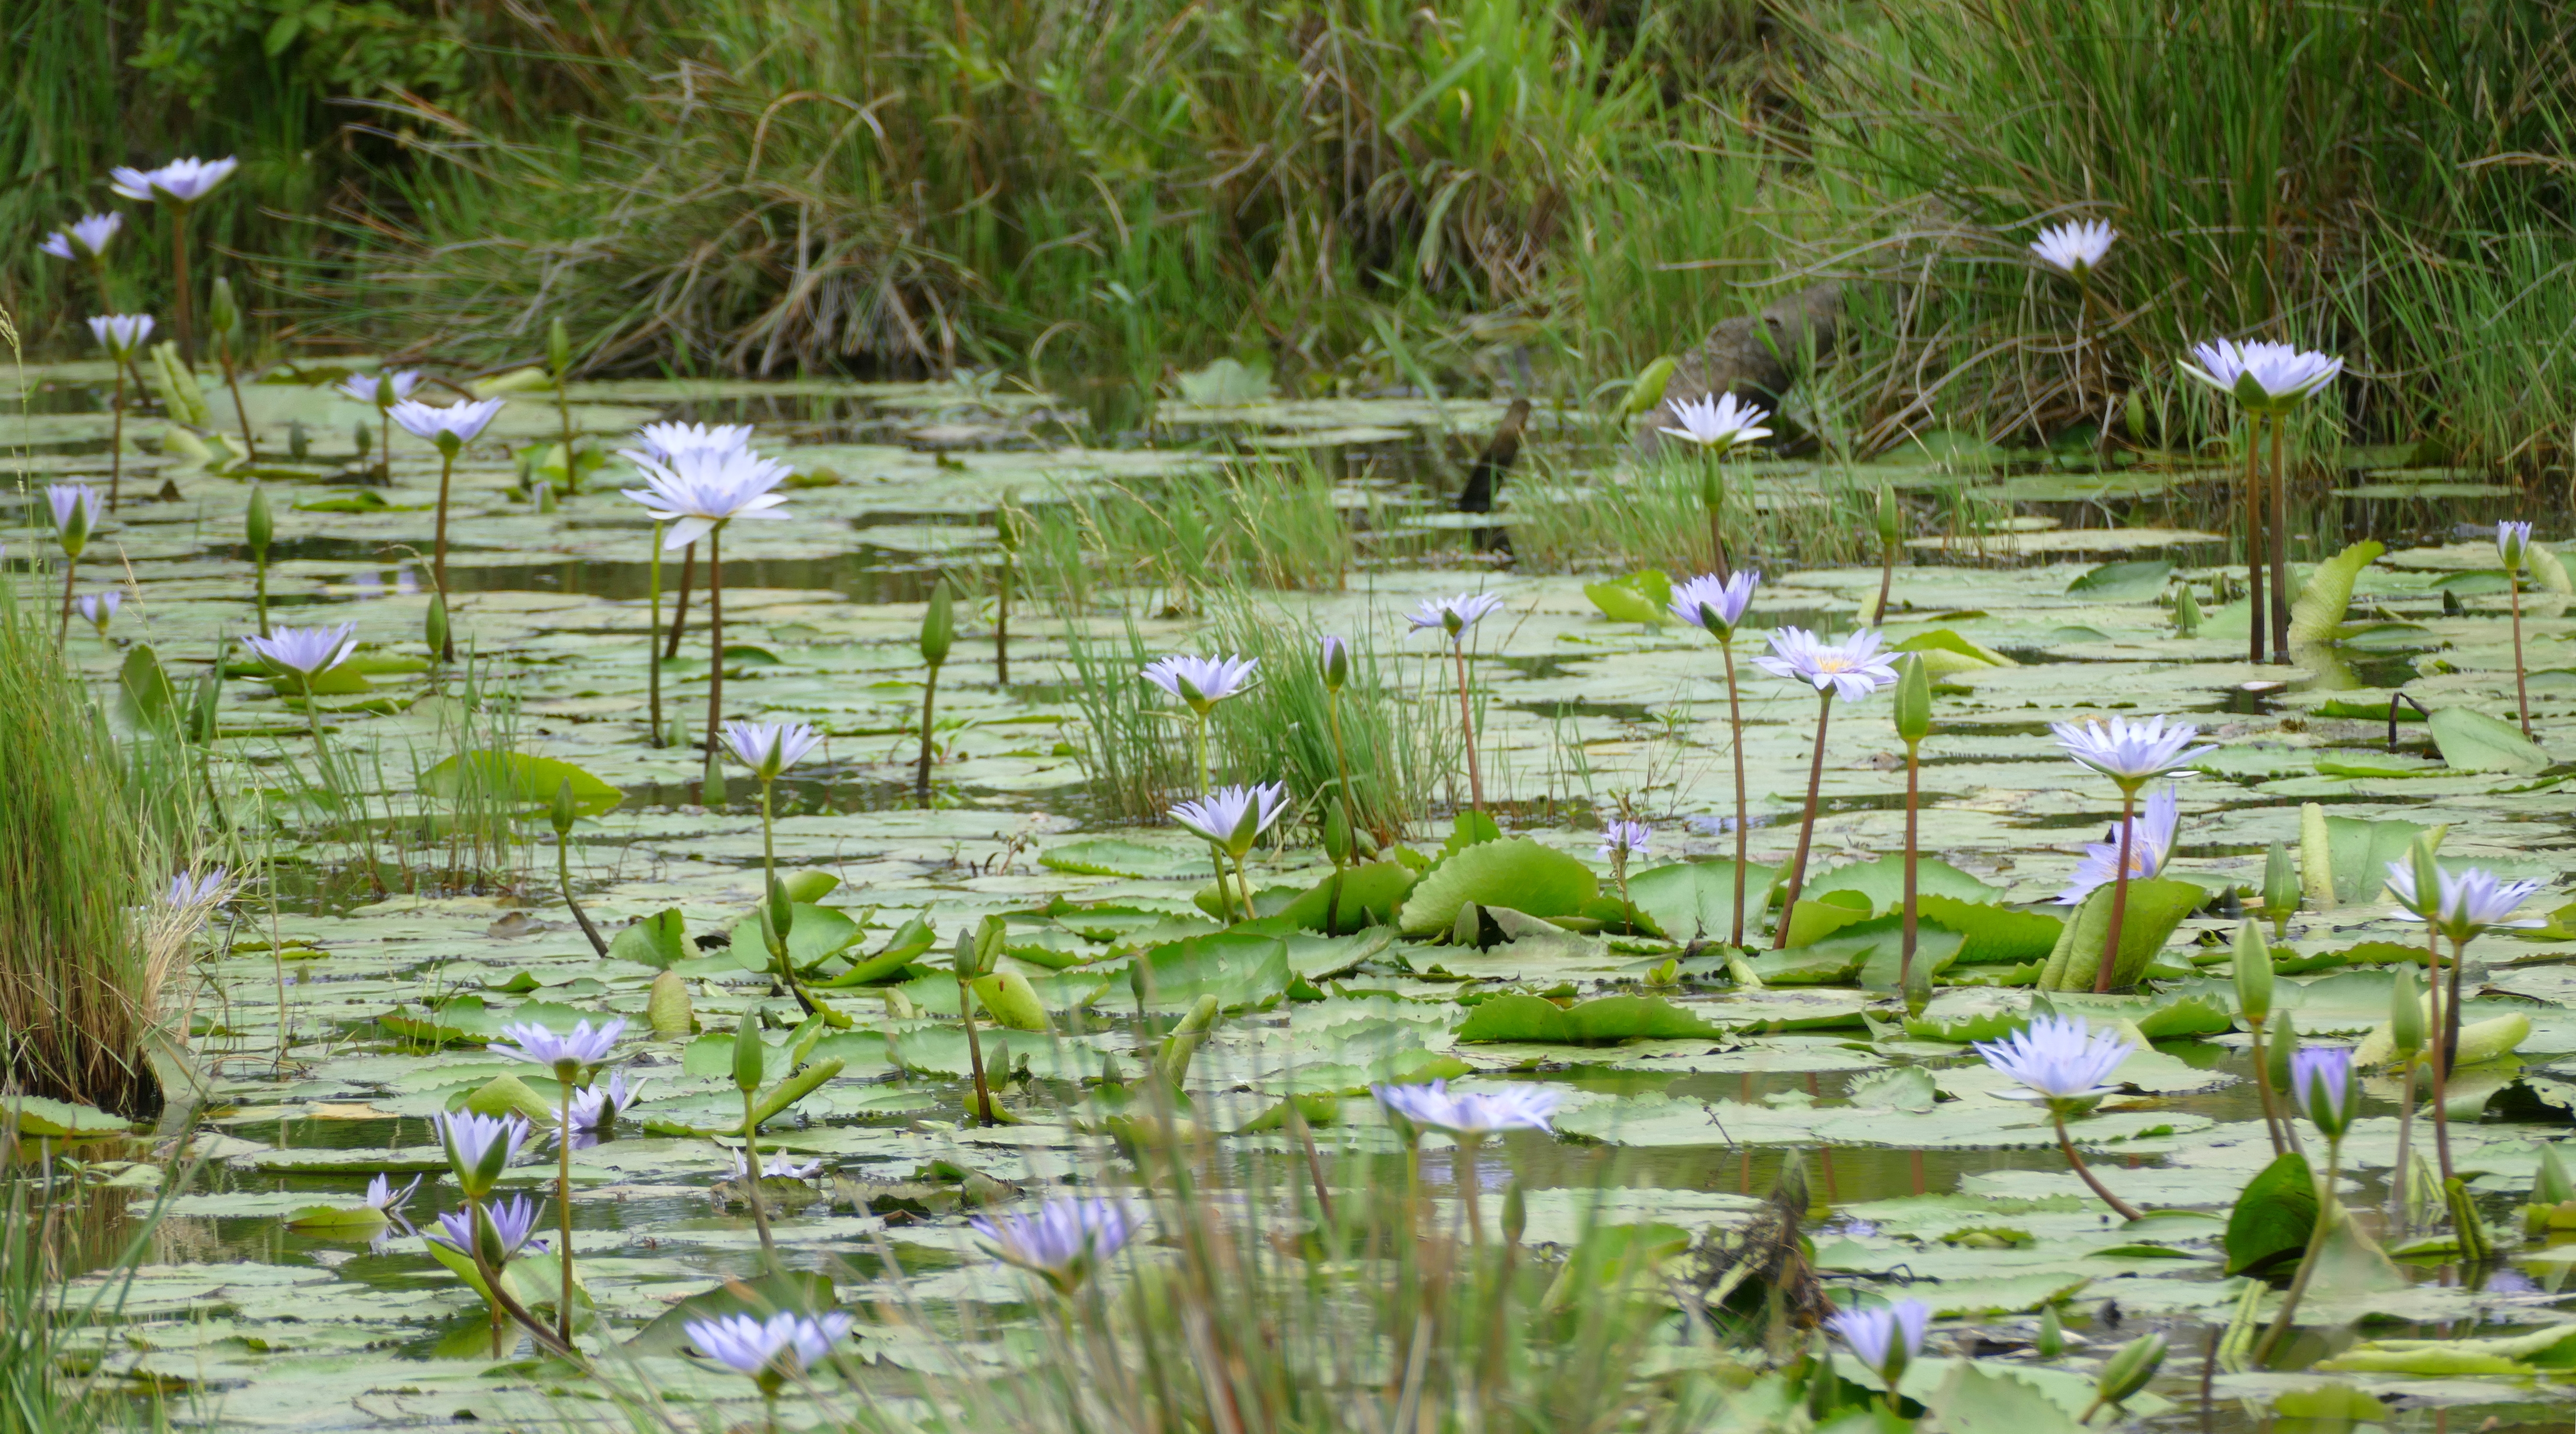 File:Blue Water Lilies (Nymphaea caerulea) in a small pond   (32749839328).jpg - Wikimedia Commons